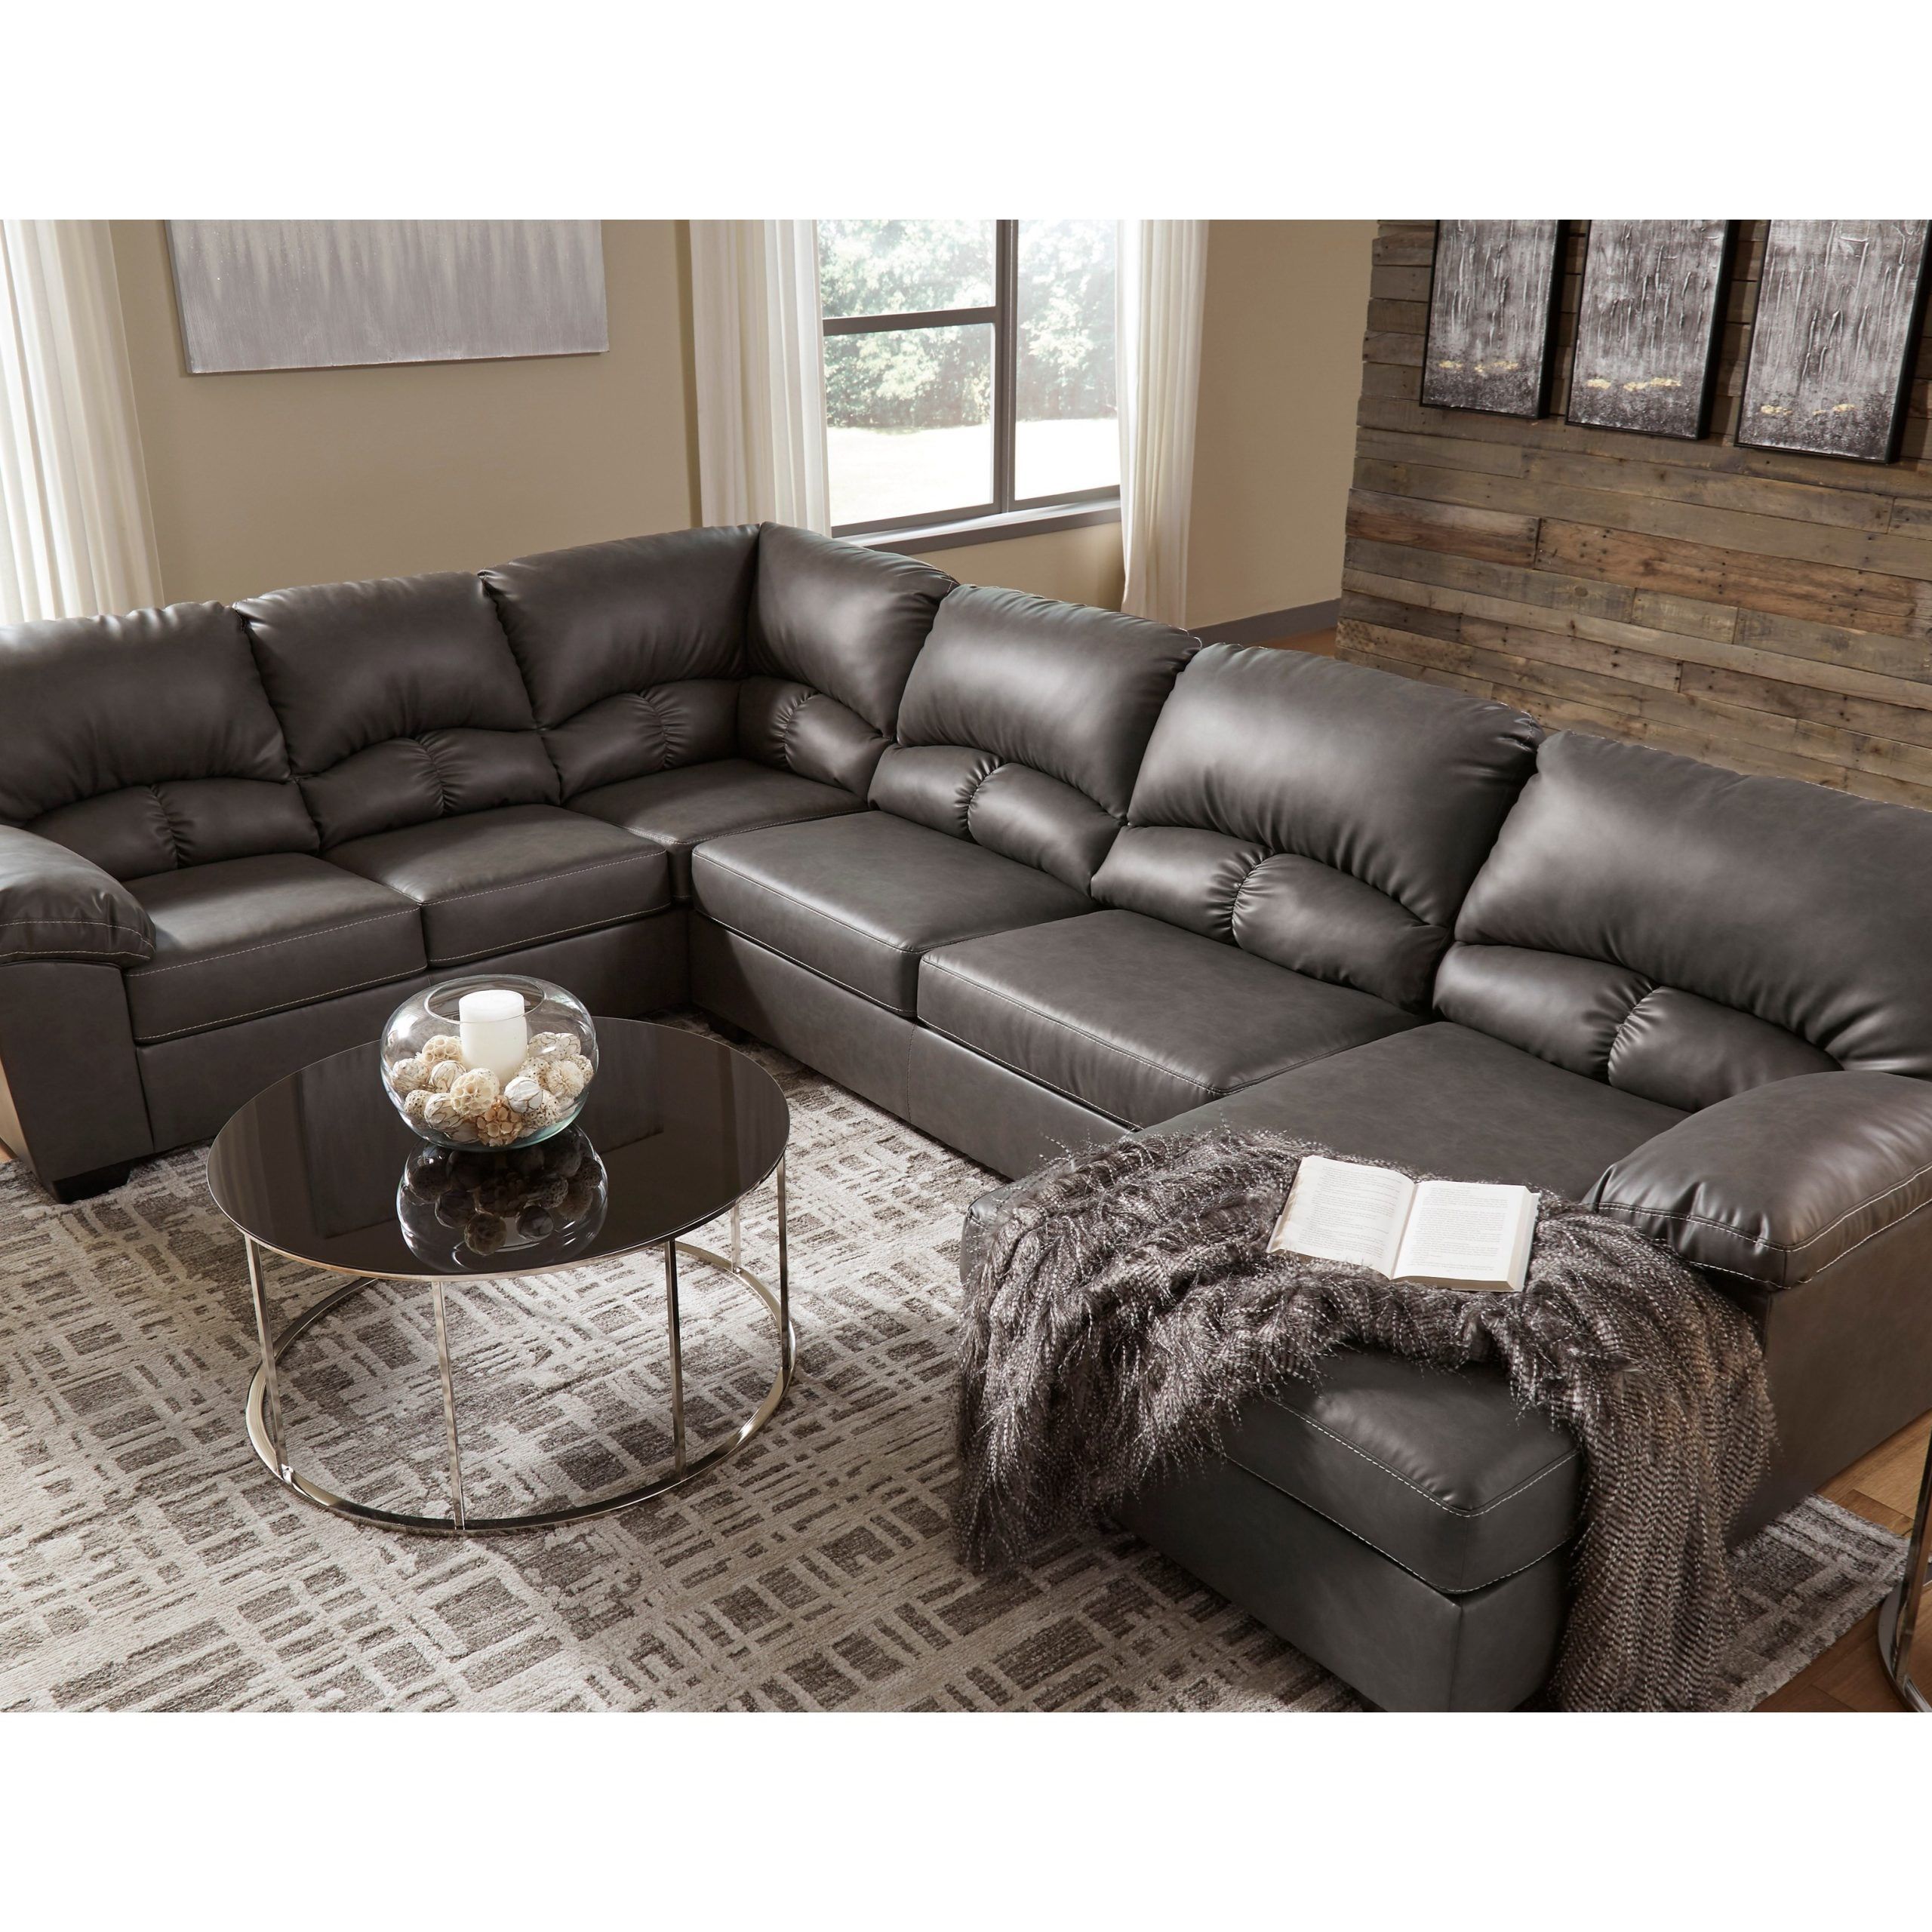 Benchcraft Aberton Faux Leather 3 Piece Sectional With Chaise | Wayside For 104" Sectional Sofas (Gallery 11 of 20)